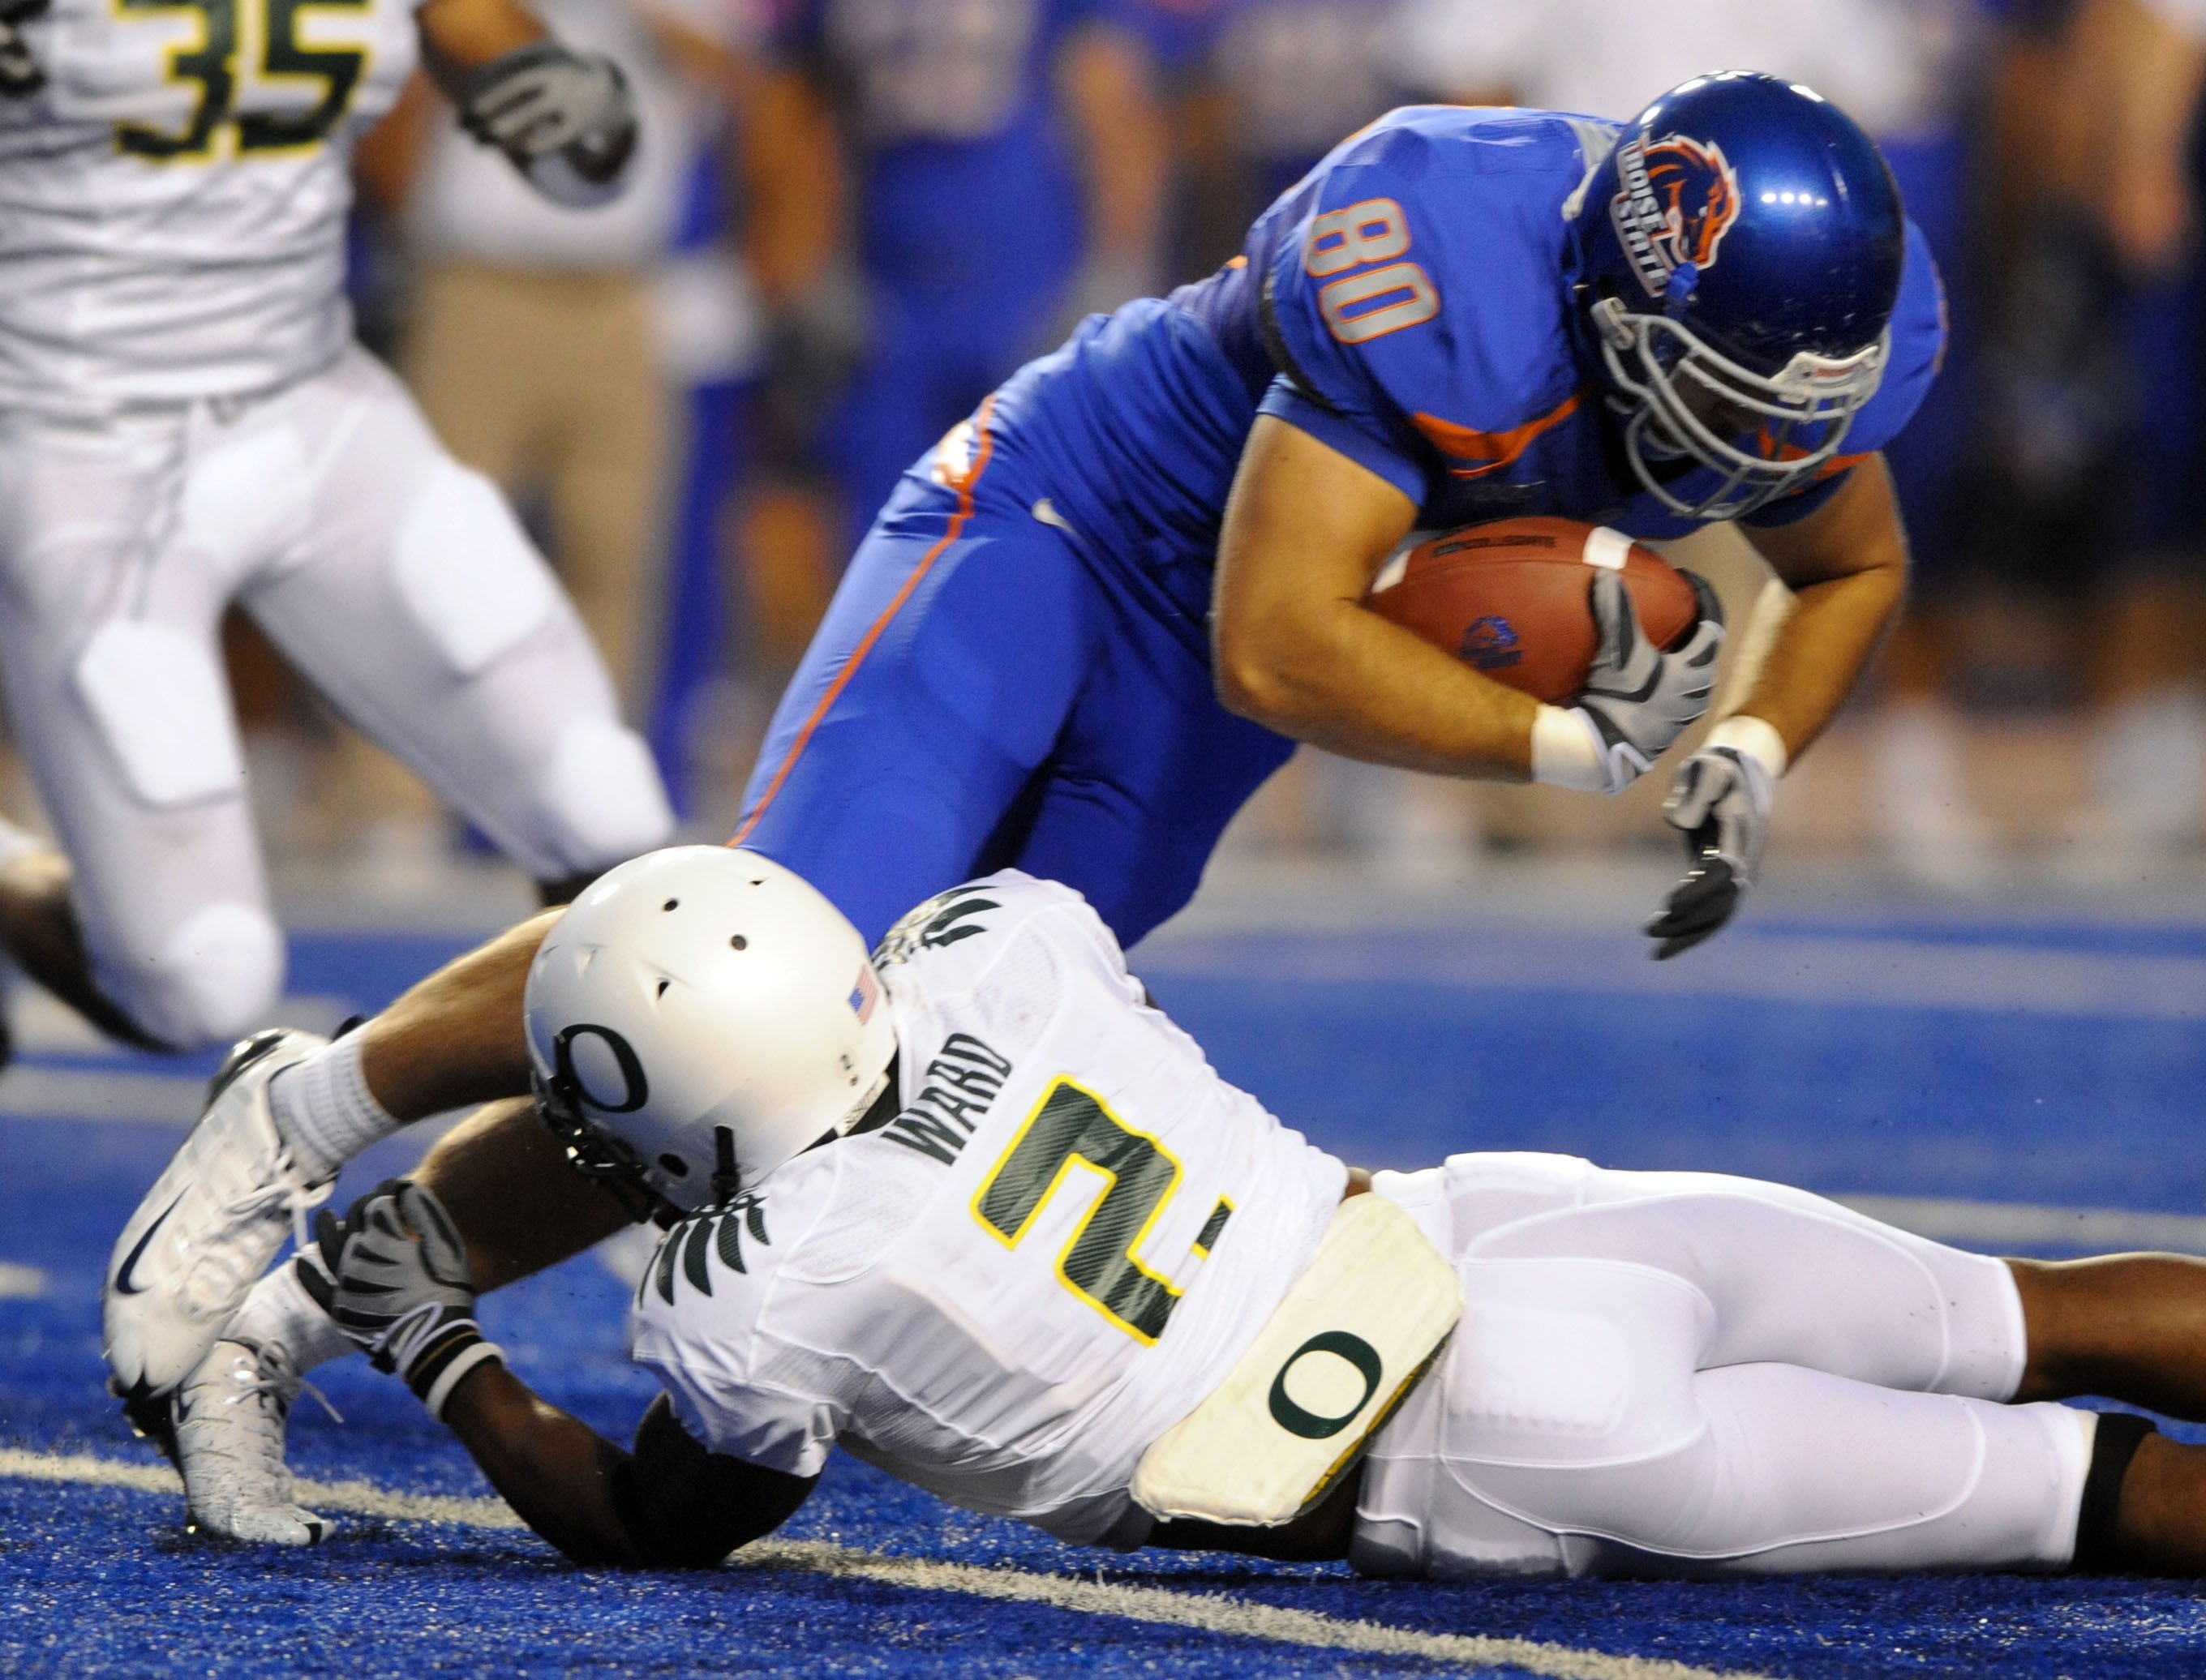 BOISE, ID - SEPTEMBER 3: Safety T.J Ward #2 of the Oregon Ducks  tackles tight end Kyle Efaw #80 of the Boise State Broncos in the second quarter of the game on September 3, 2009 at Bronco Stadium in Boise, Idaho. Boise State won the game 19-8. (Photo by